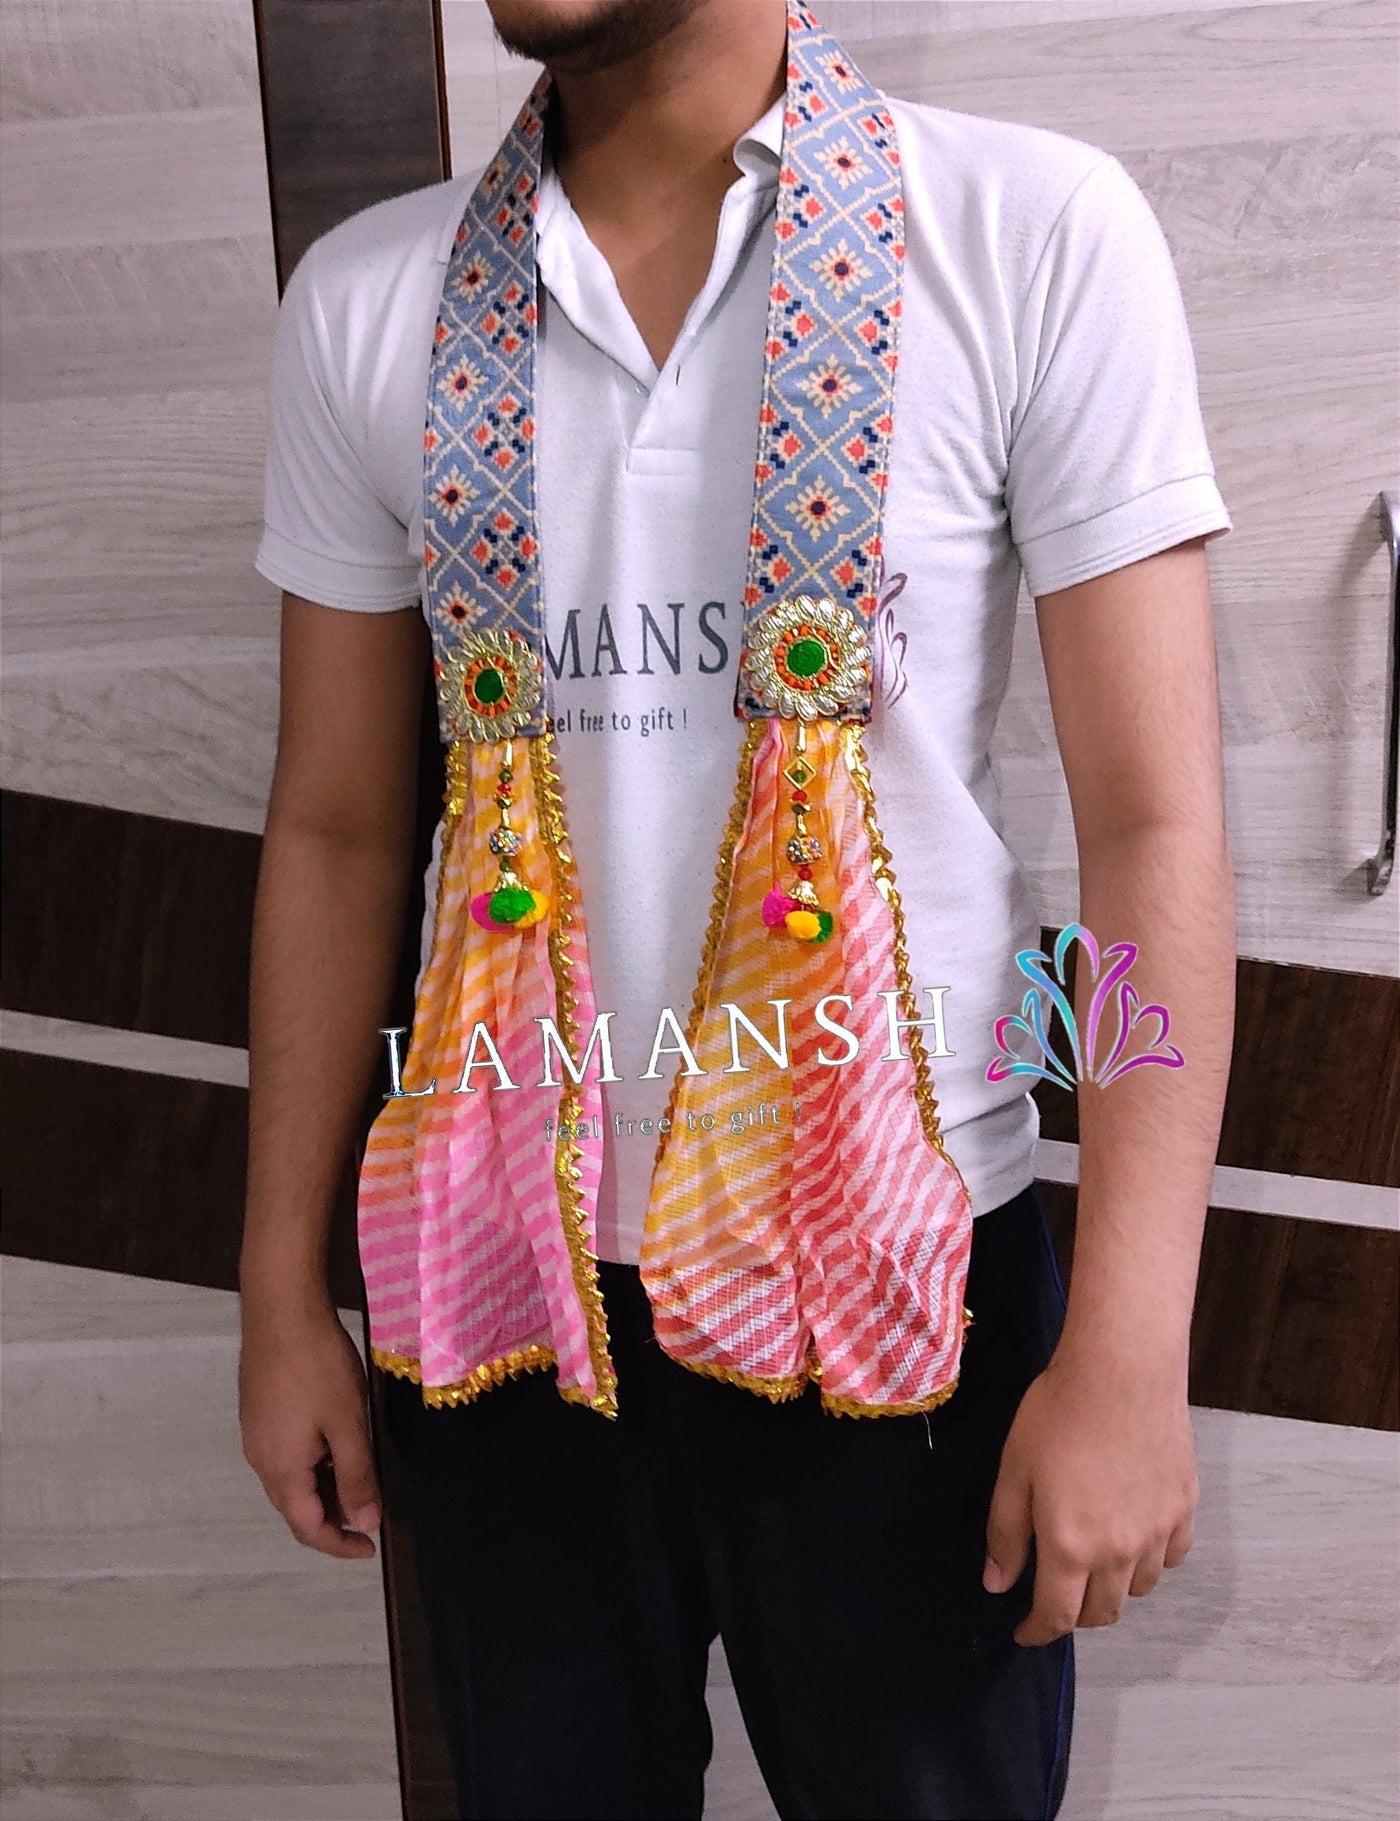 lamansh guests welcome stoles assorted colours fabric 20 lamansh 20 pc barati guests swagat stoles dupatta fabric mala s for wedding ceremony stoles for greeting guests best for hotel 2a75bcb1 5972 494e 89f4